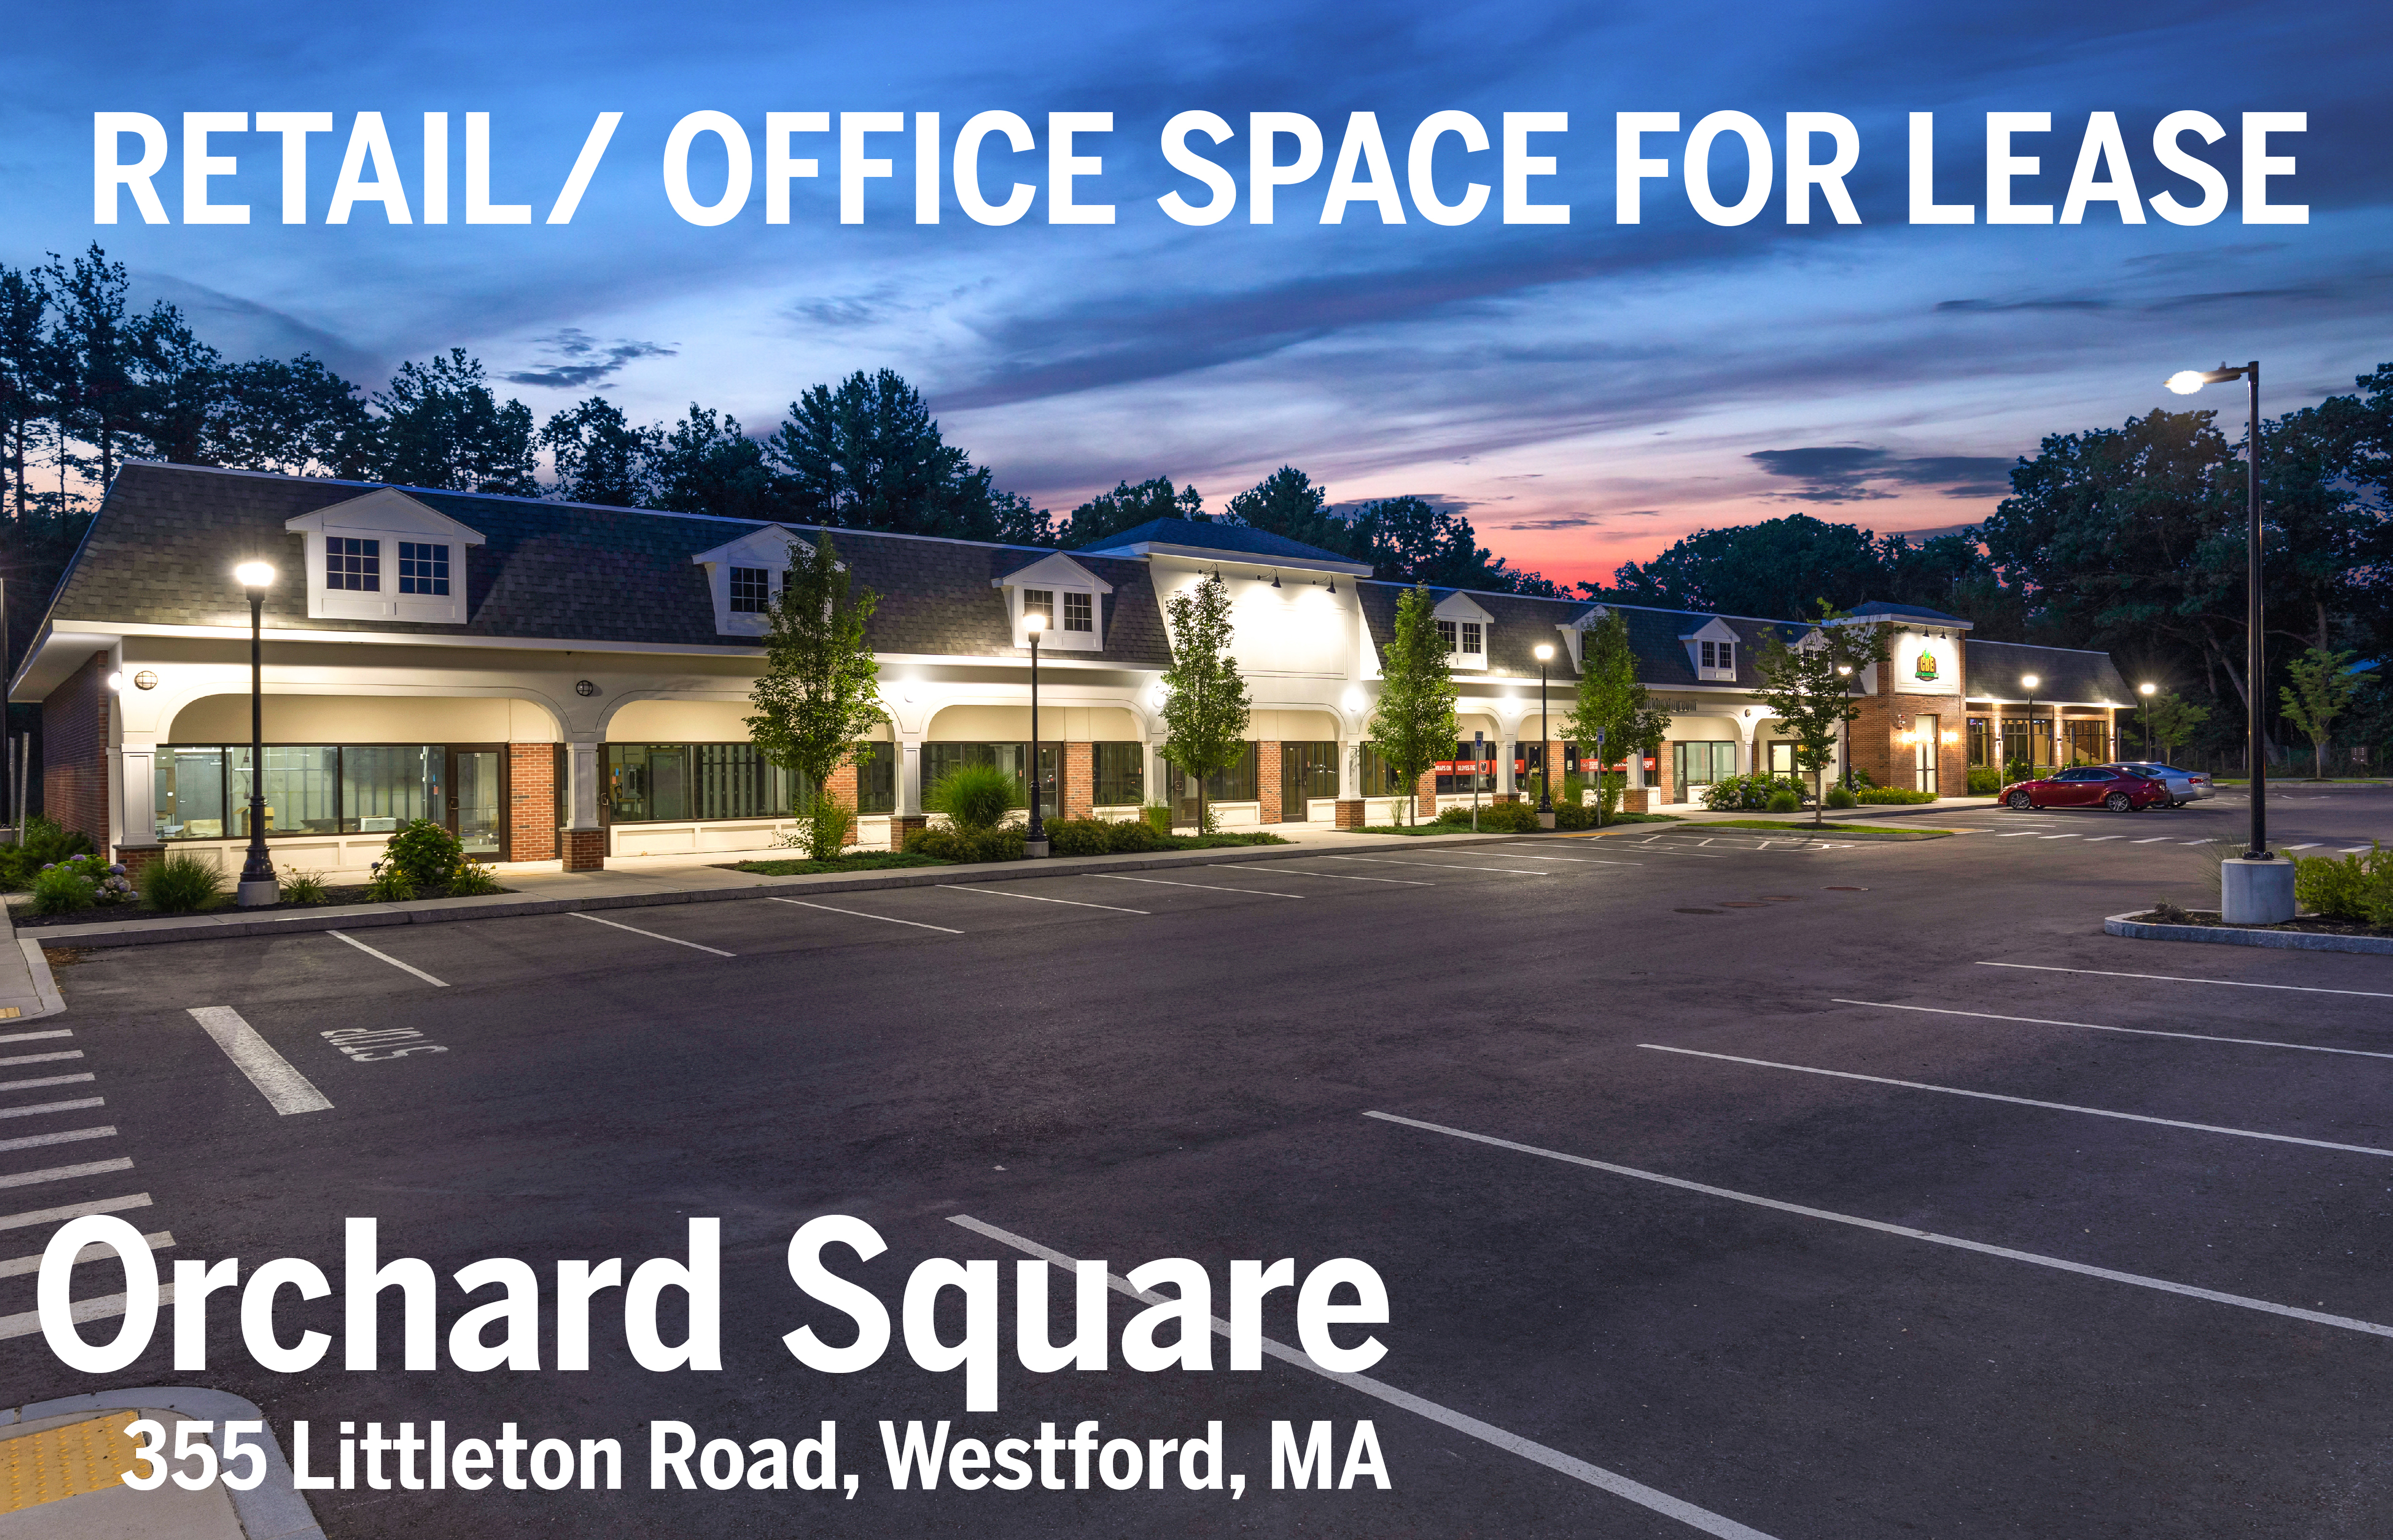 Orchard Square Retail Plaza Brochure Westford MA